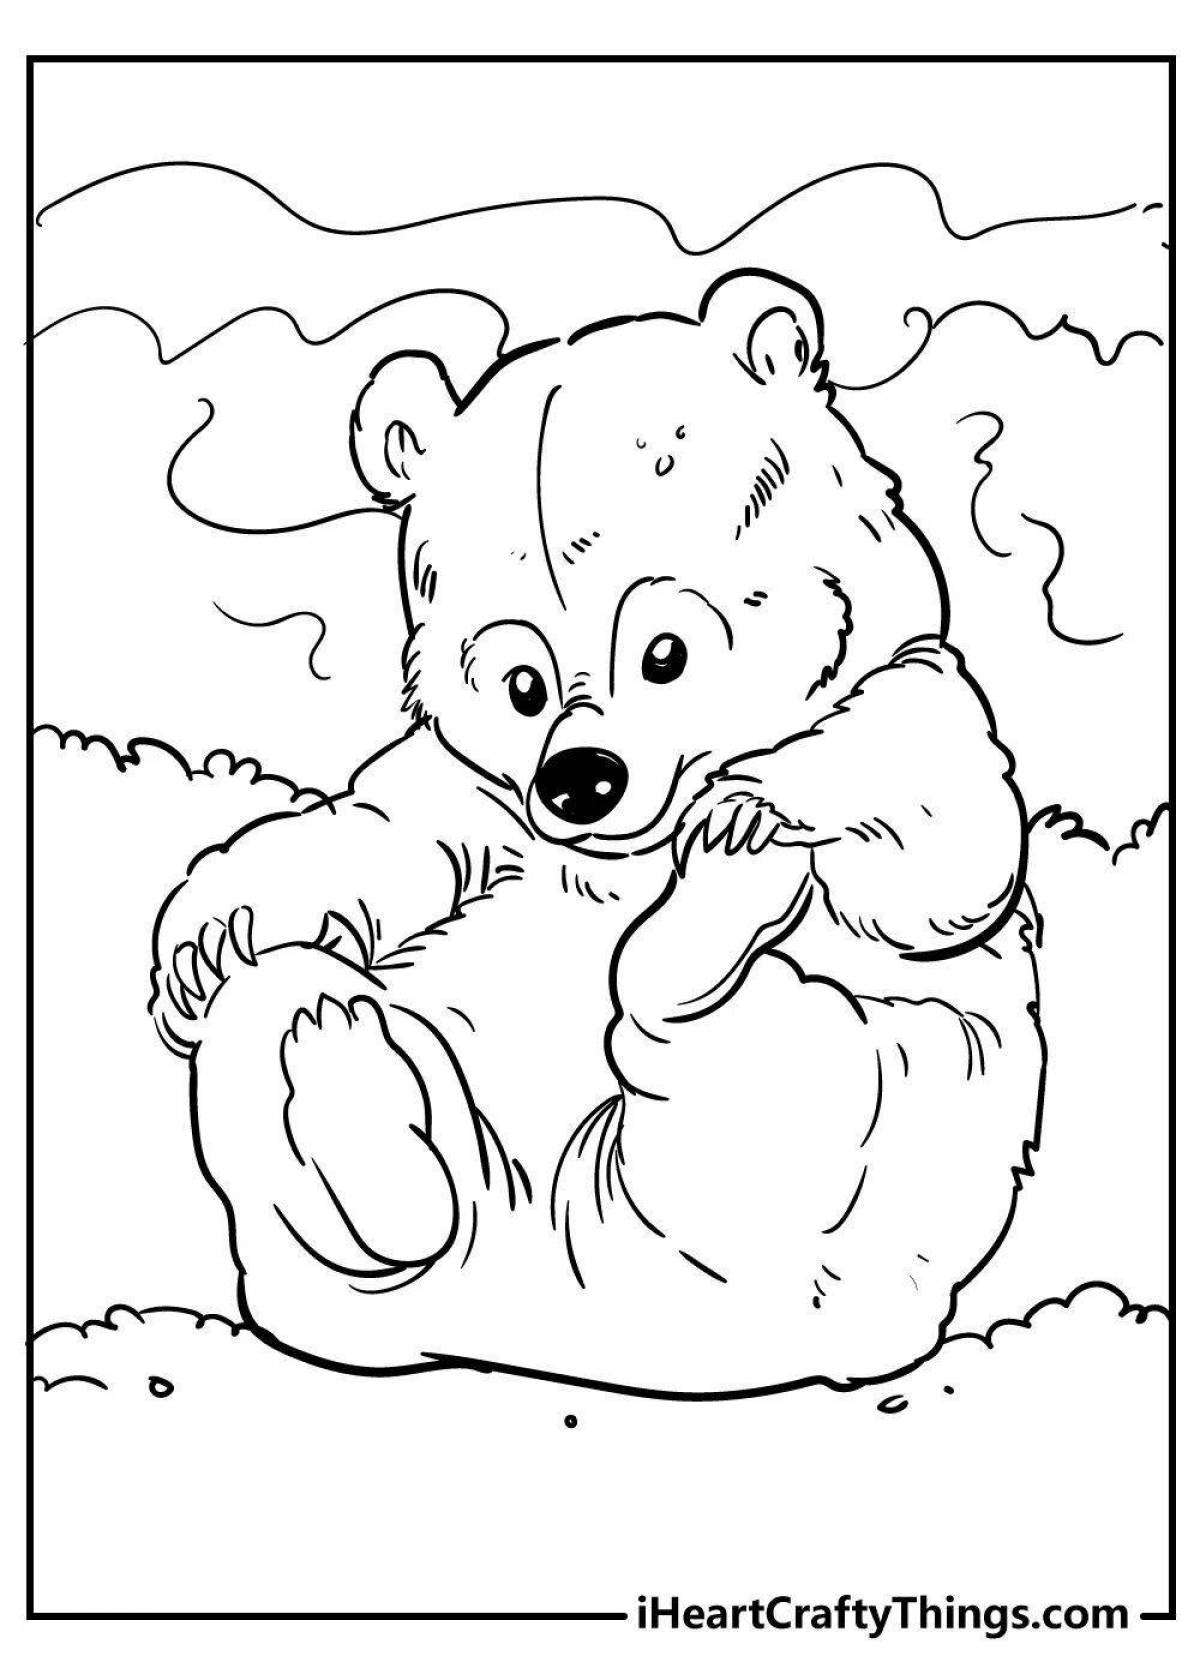 Cute teddy bear coloring book for 6-7 year olds